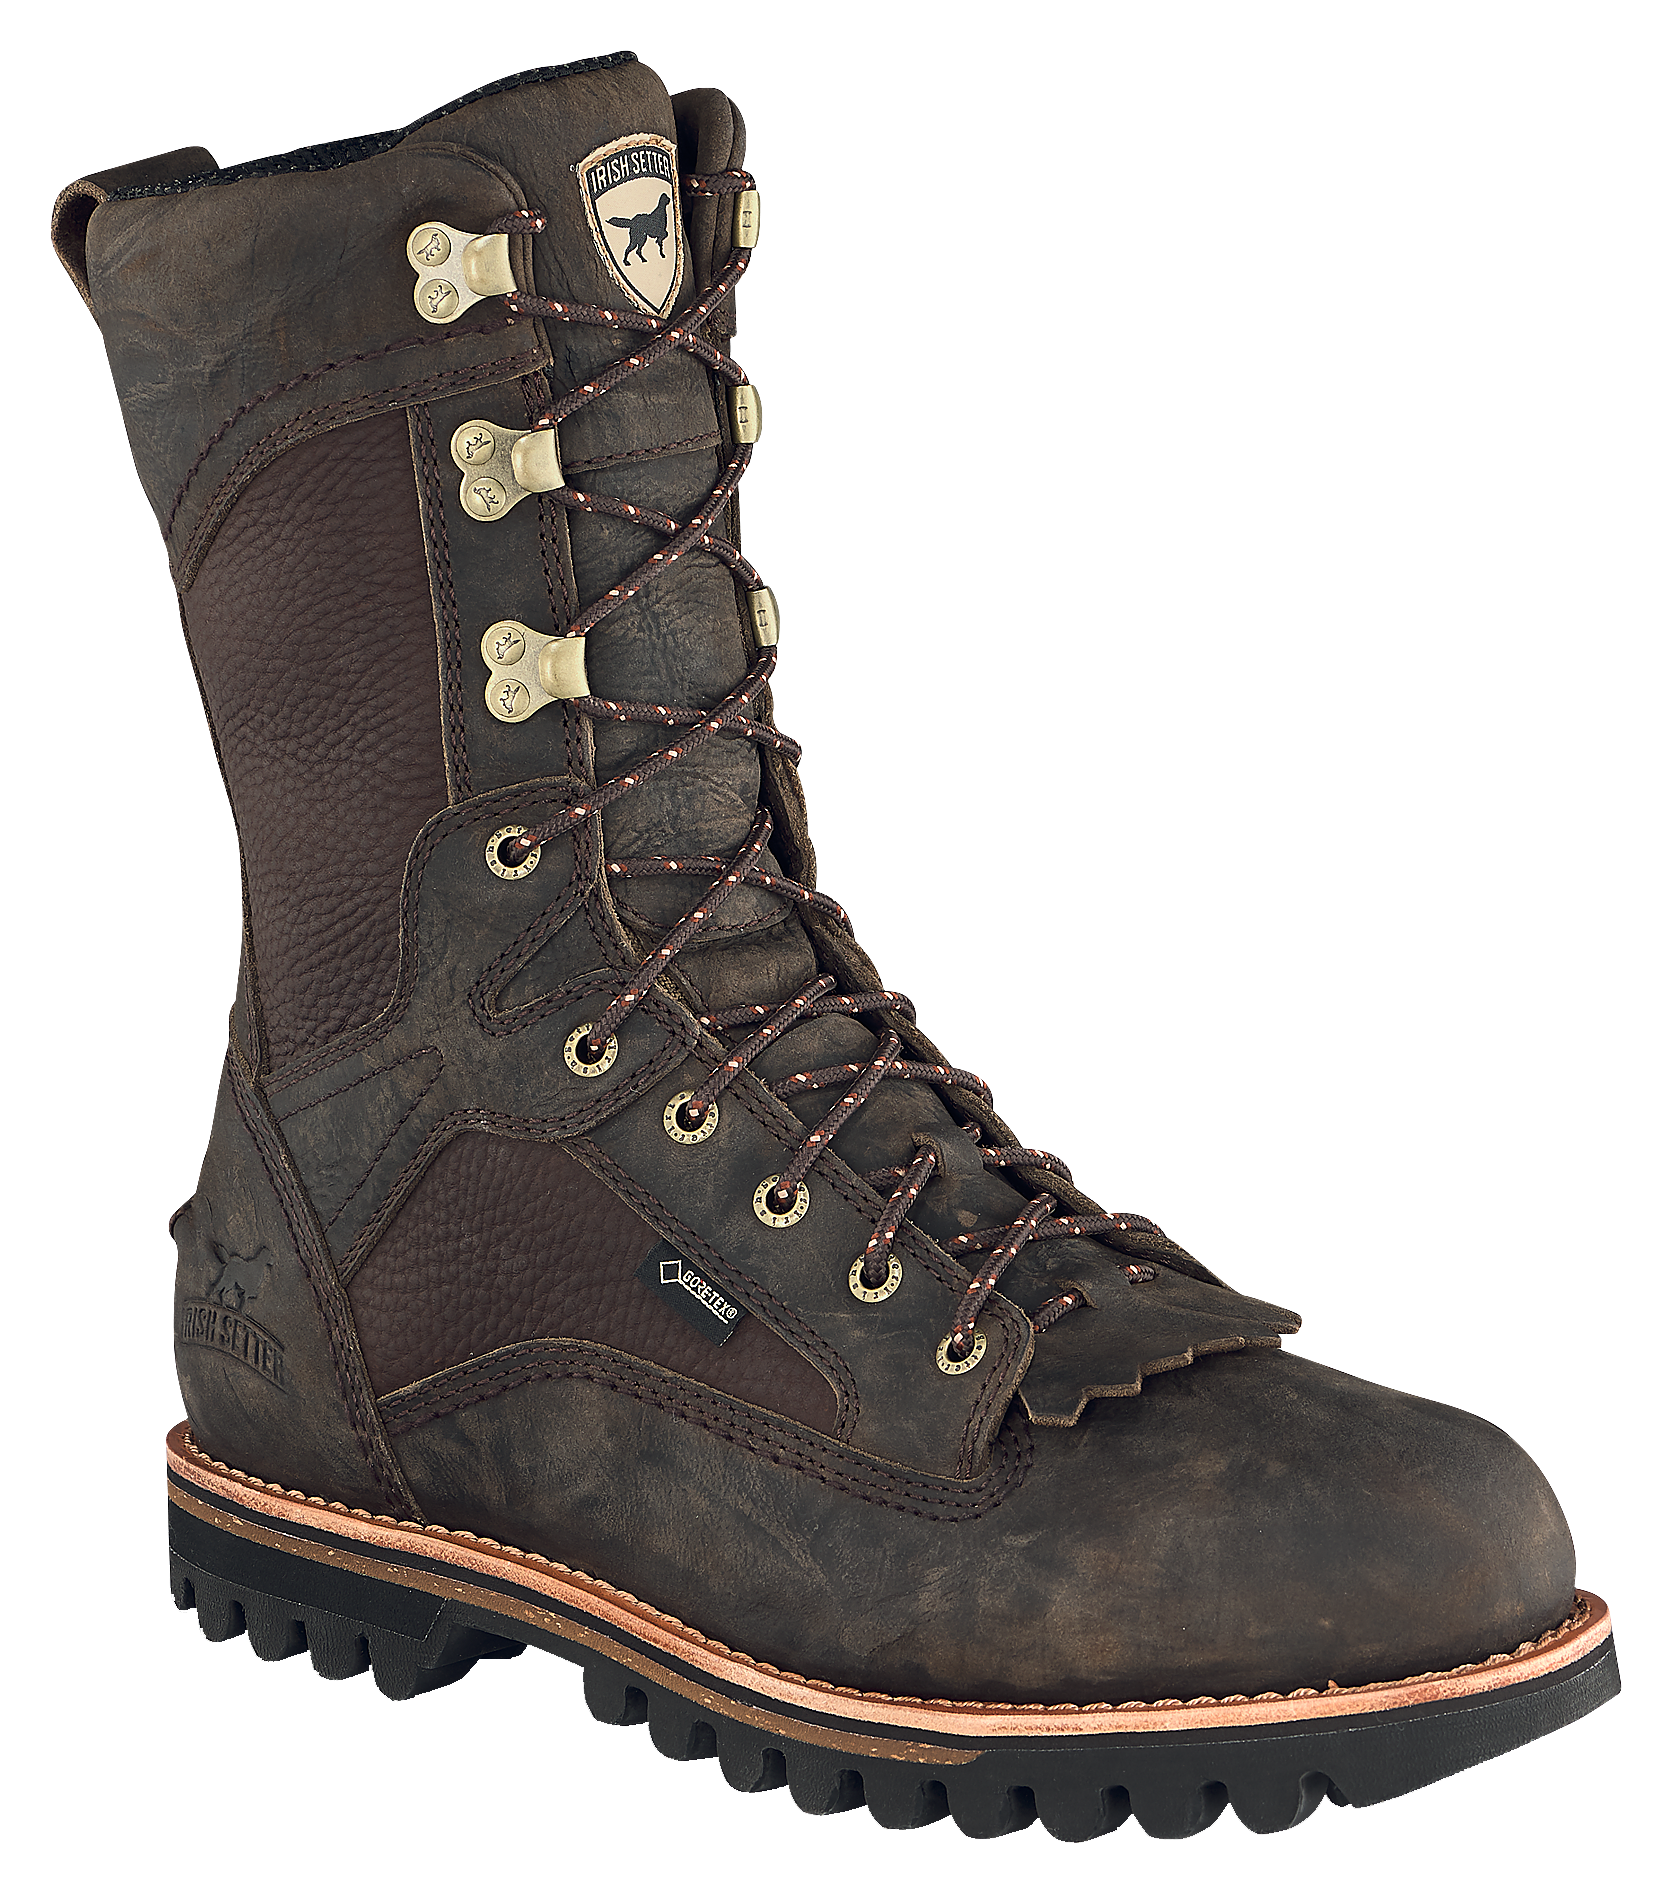 Irish Setter Elk Tracker GORE-TEX Insulated Hunting Boots for Men - Brown - 10.5W